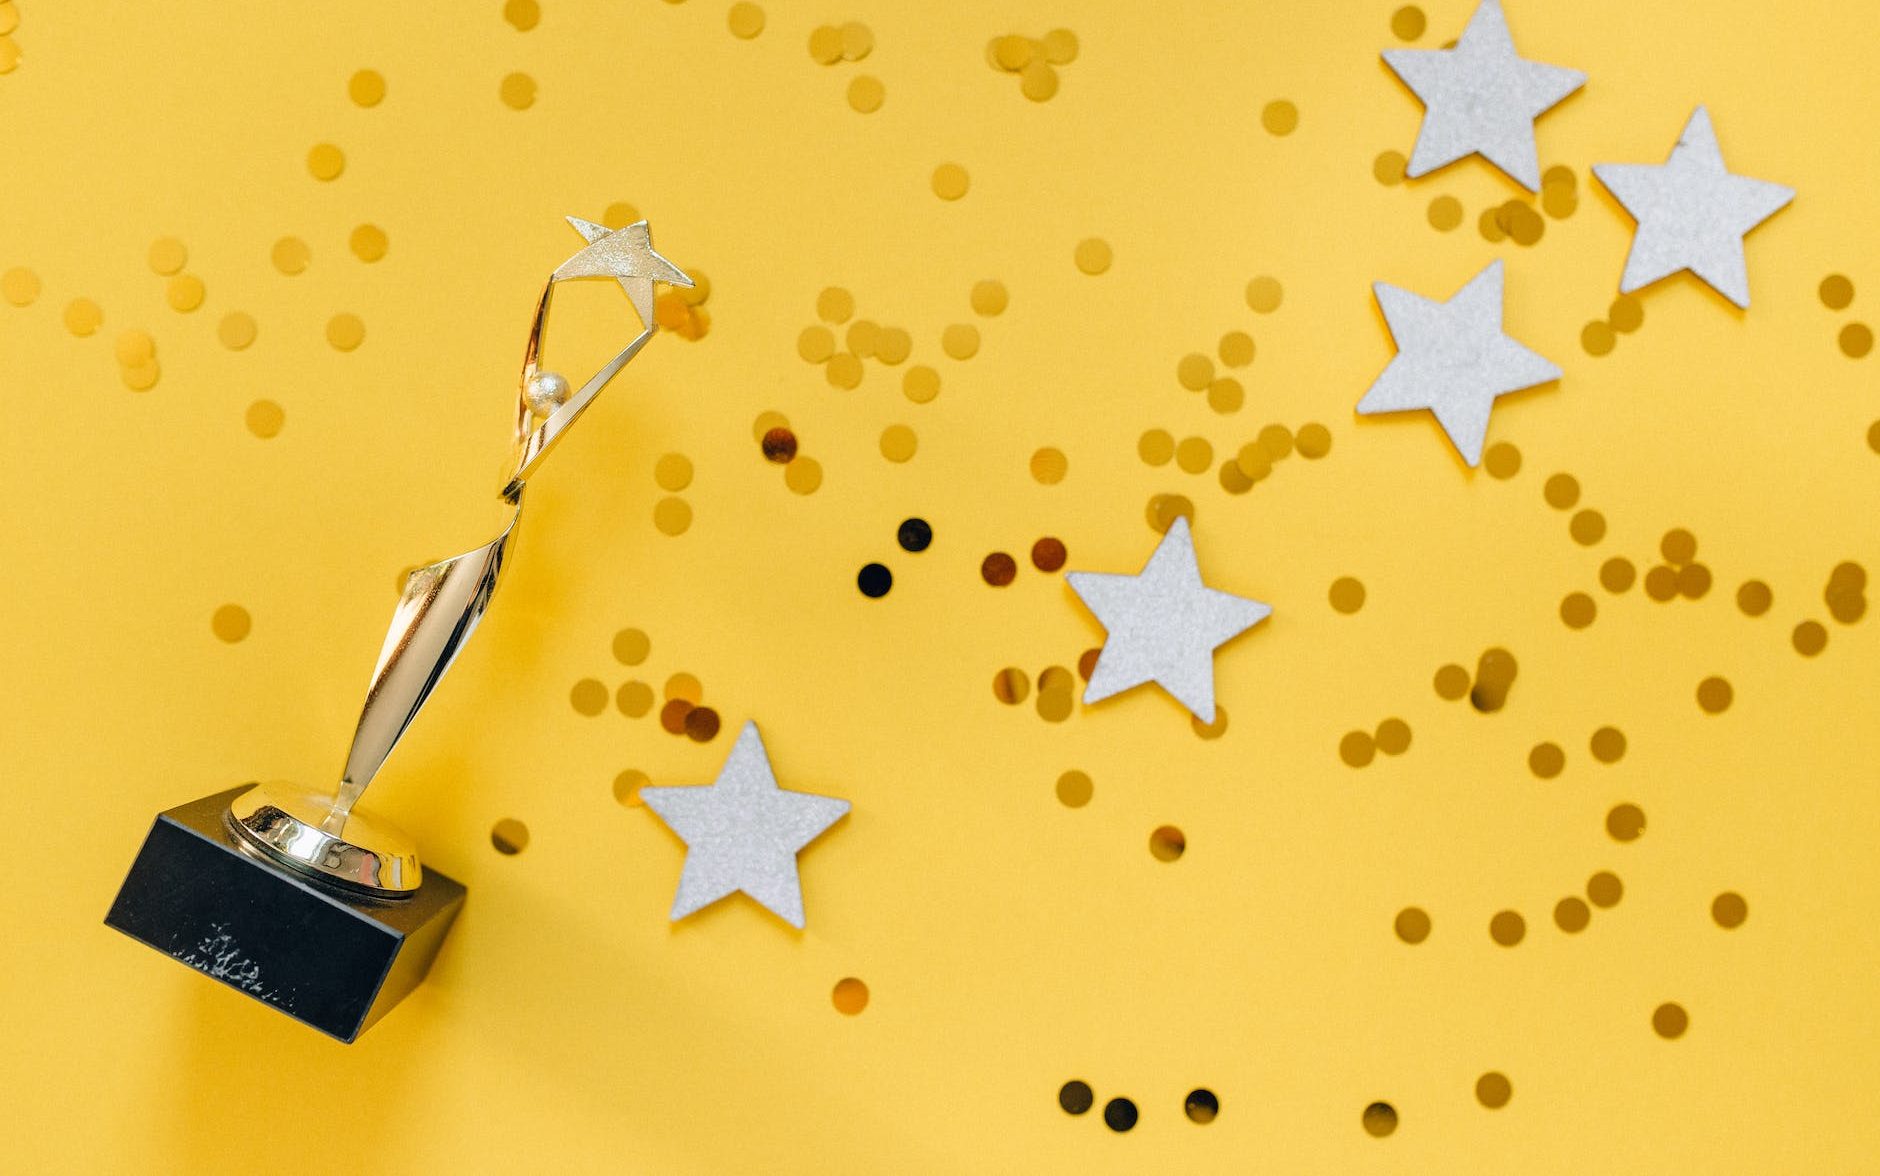 golden statuette and stars on yellow background